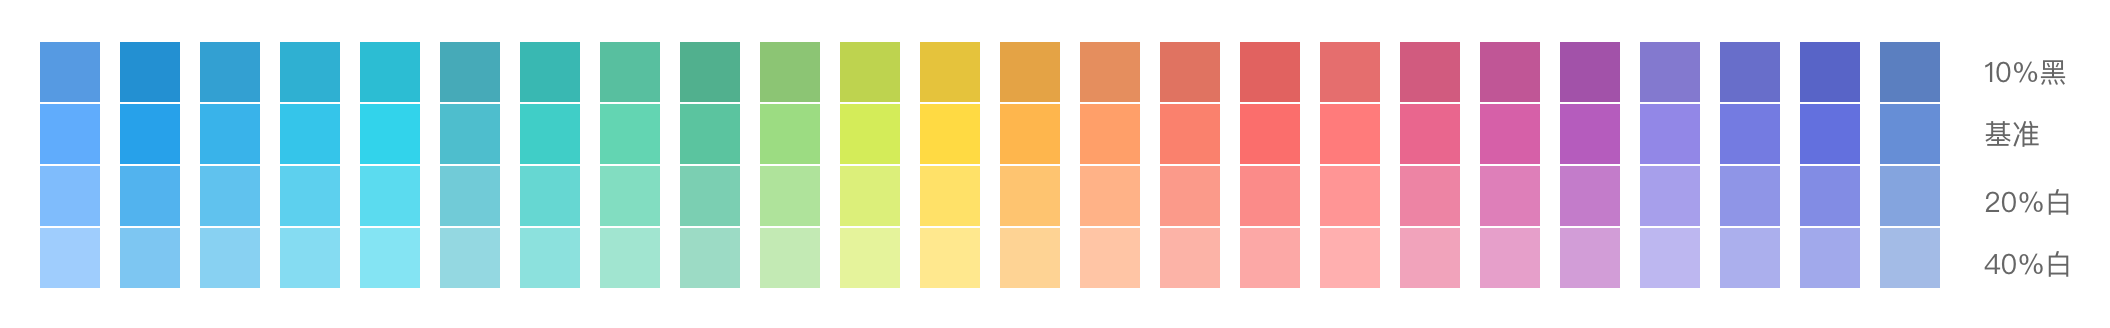 charts_color_img03.png